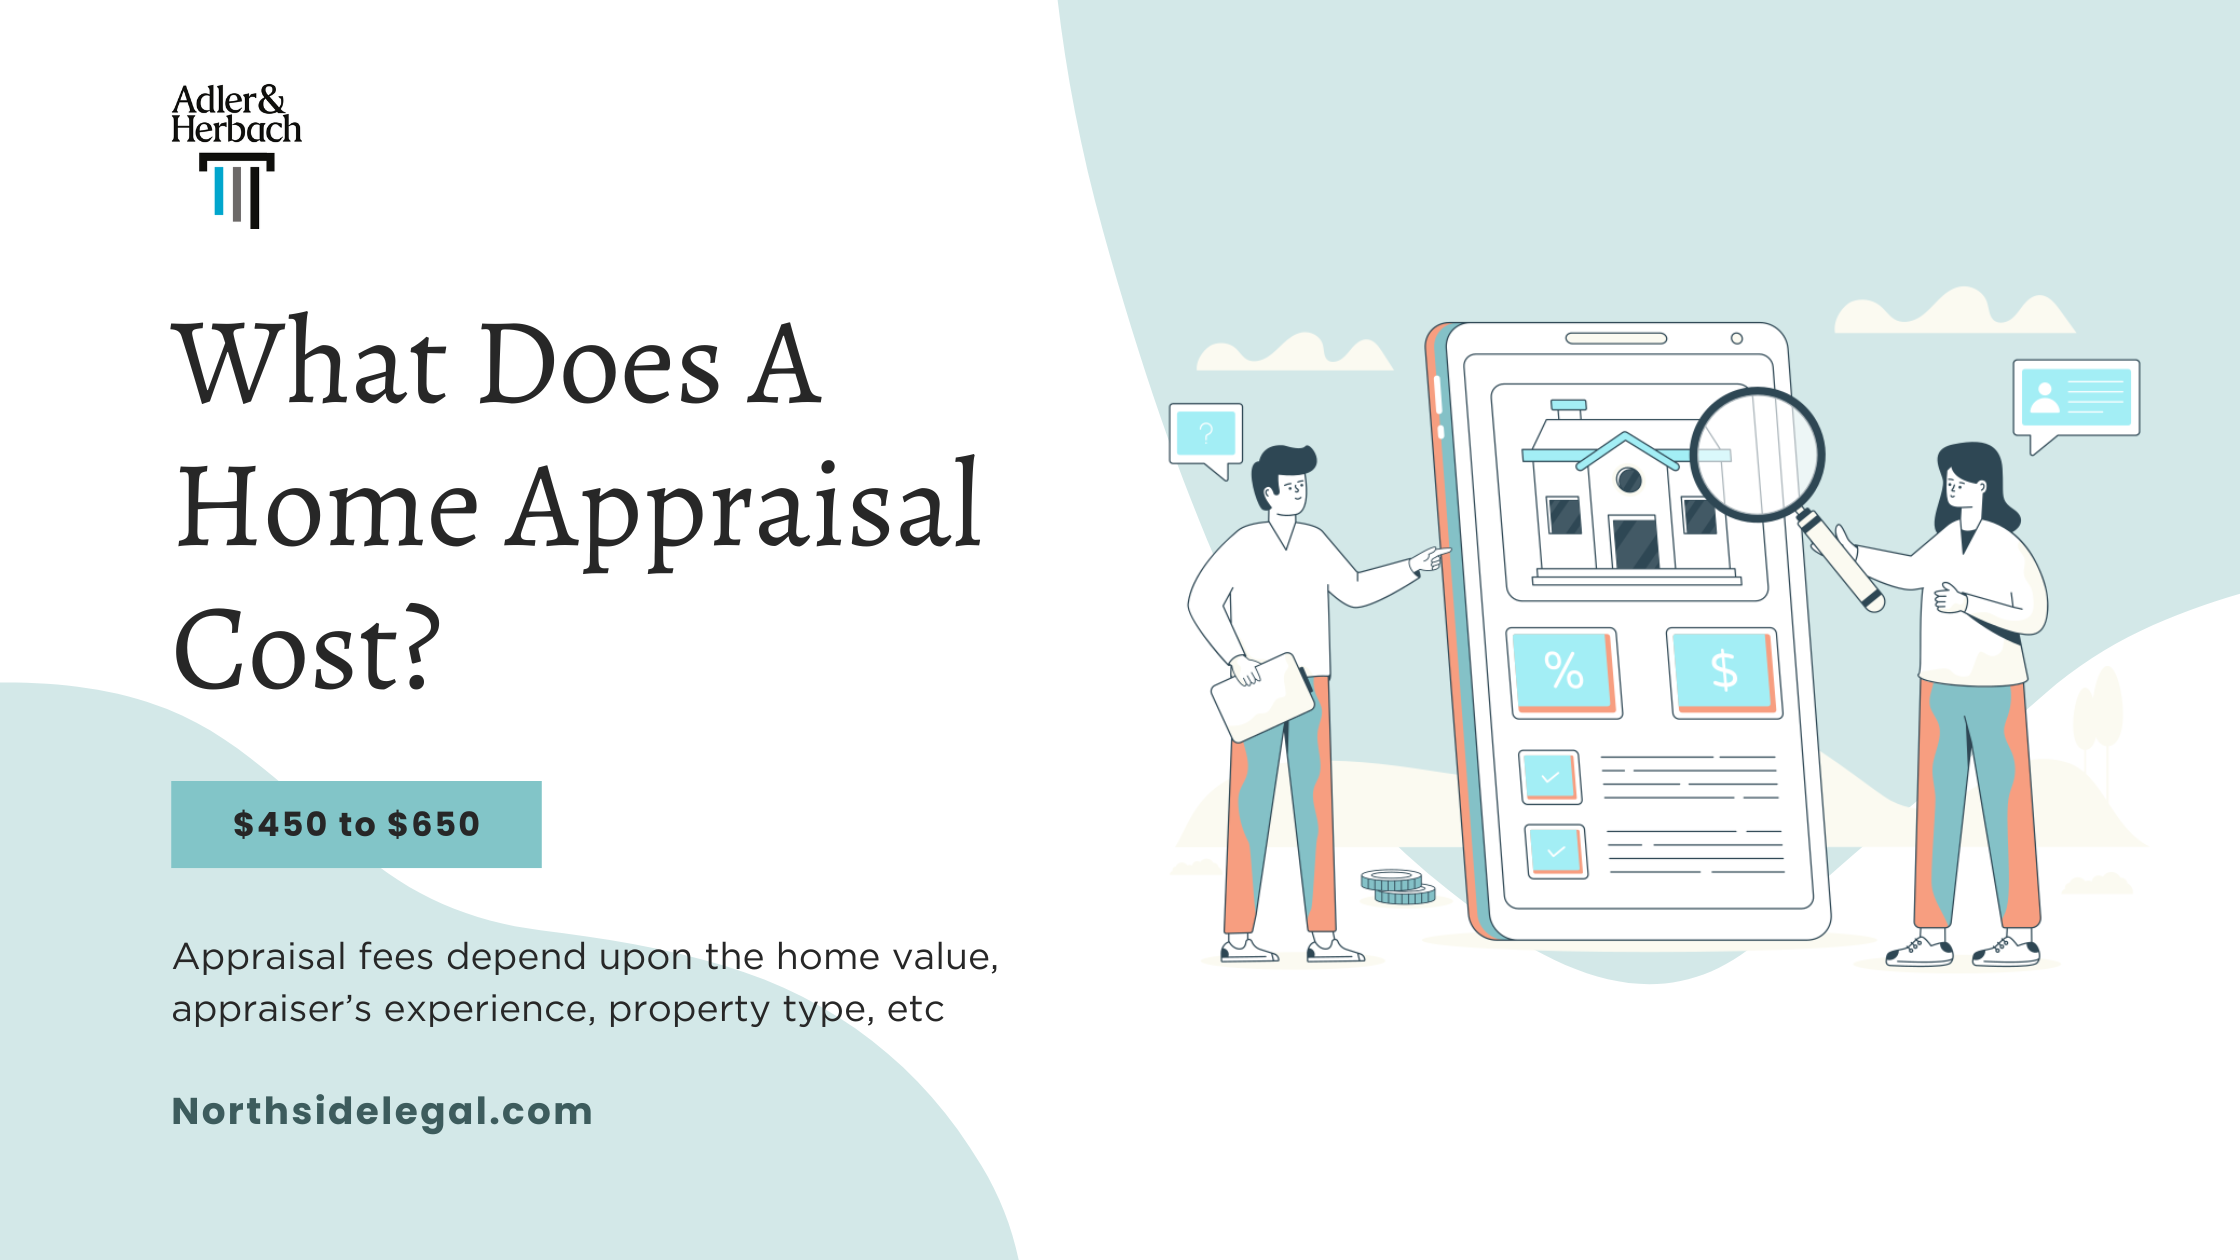 What Does a Home Appraisal Cost?